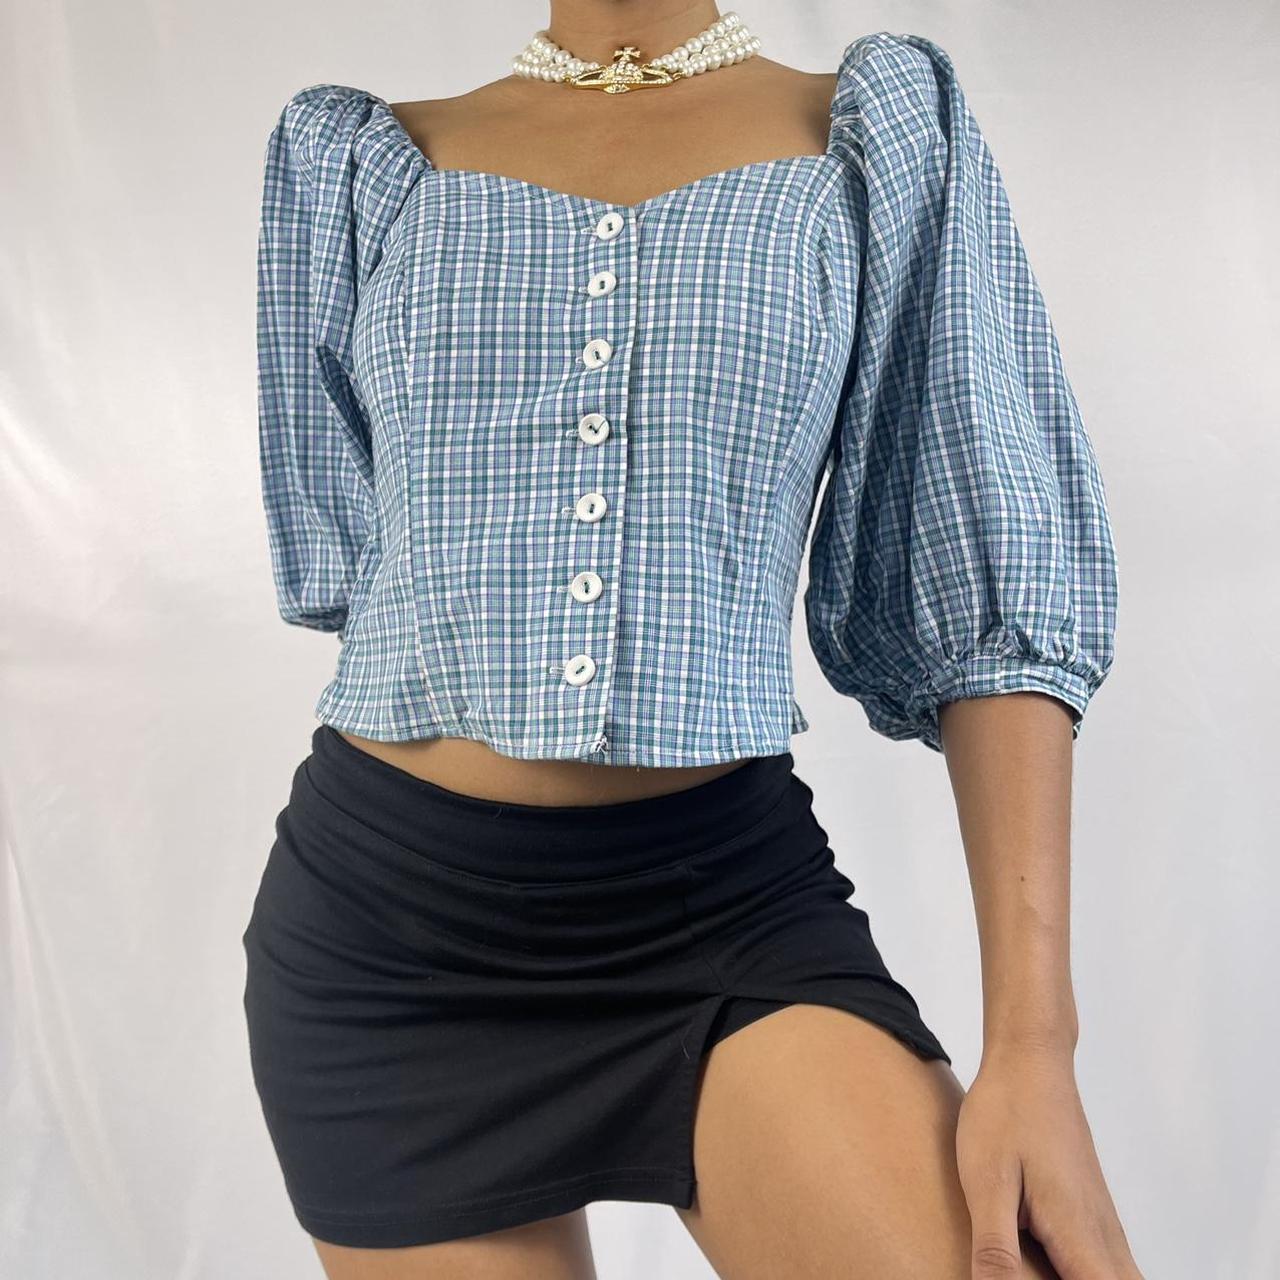 Product Image 2 - VINTAGE 90S MILKMAID TOP

ABOUT THE